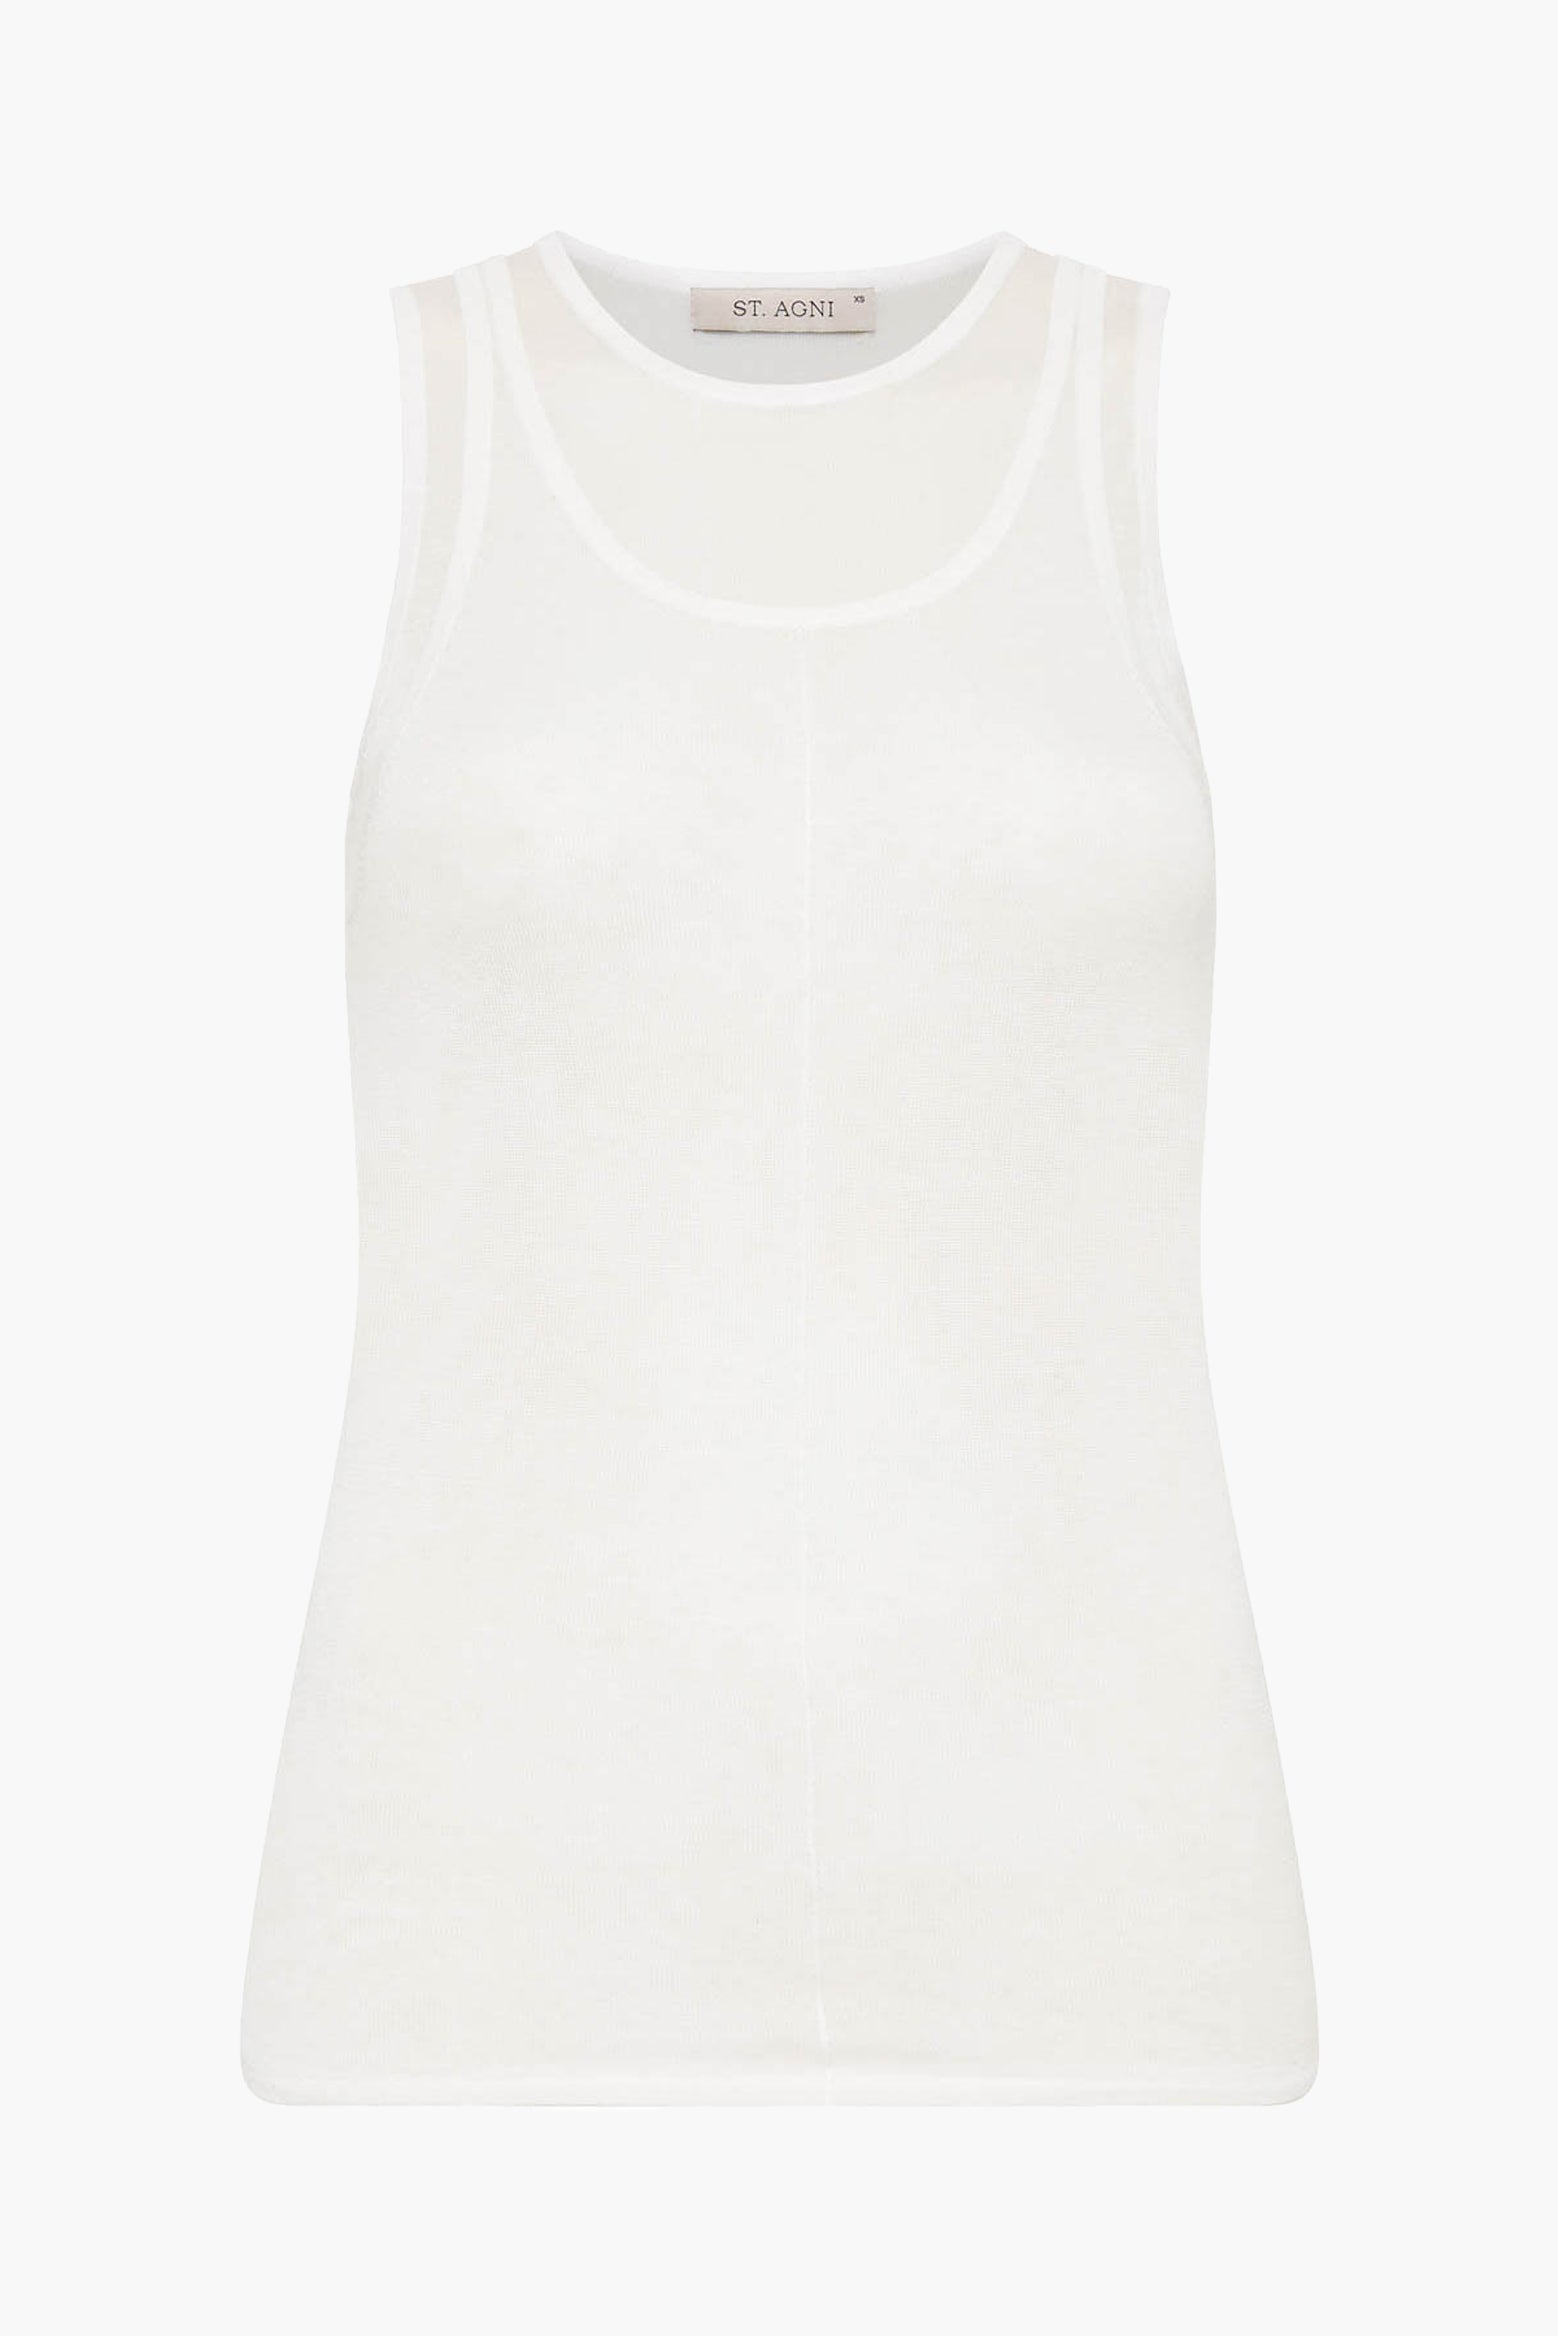 St Agni Semi Sheer Double Layered Tank in White available at The New Trend Australia. 